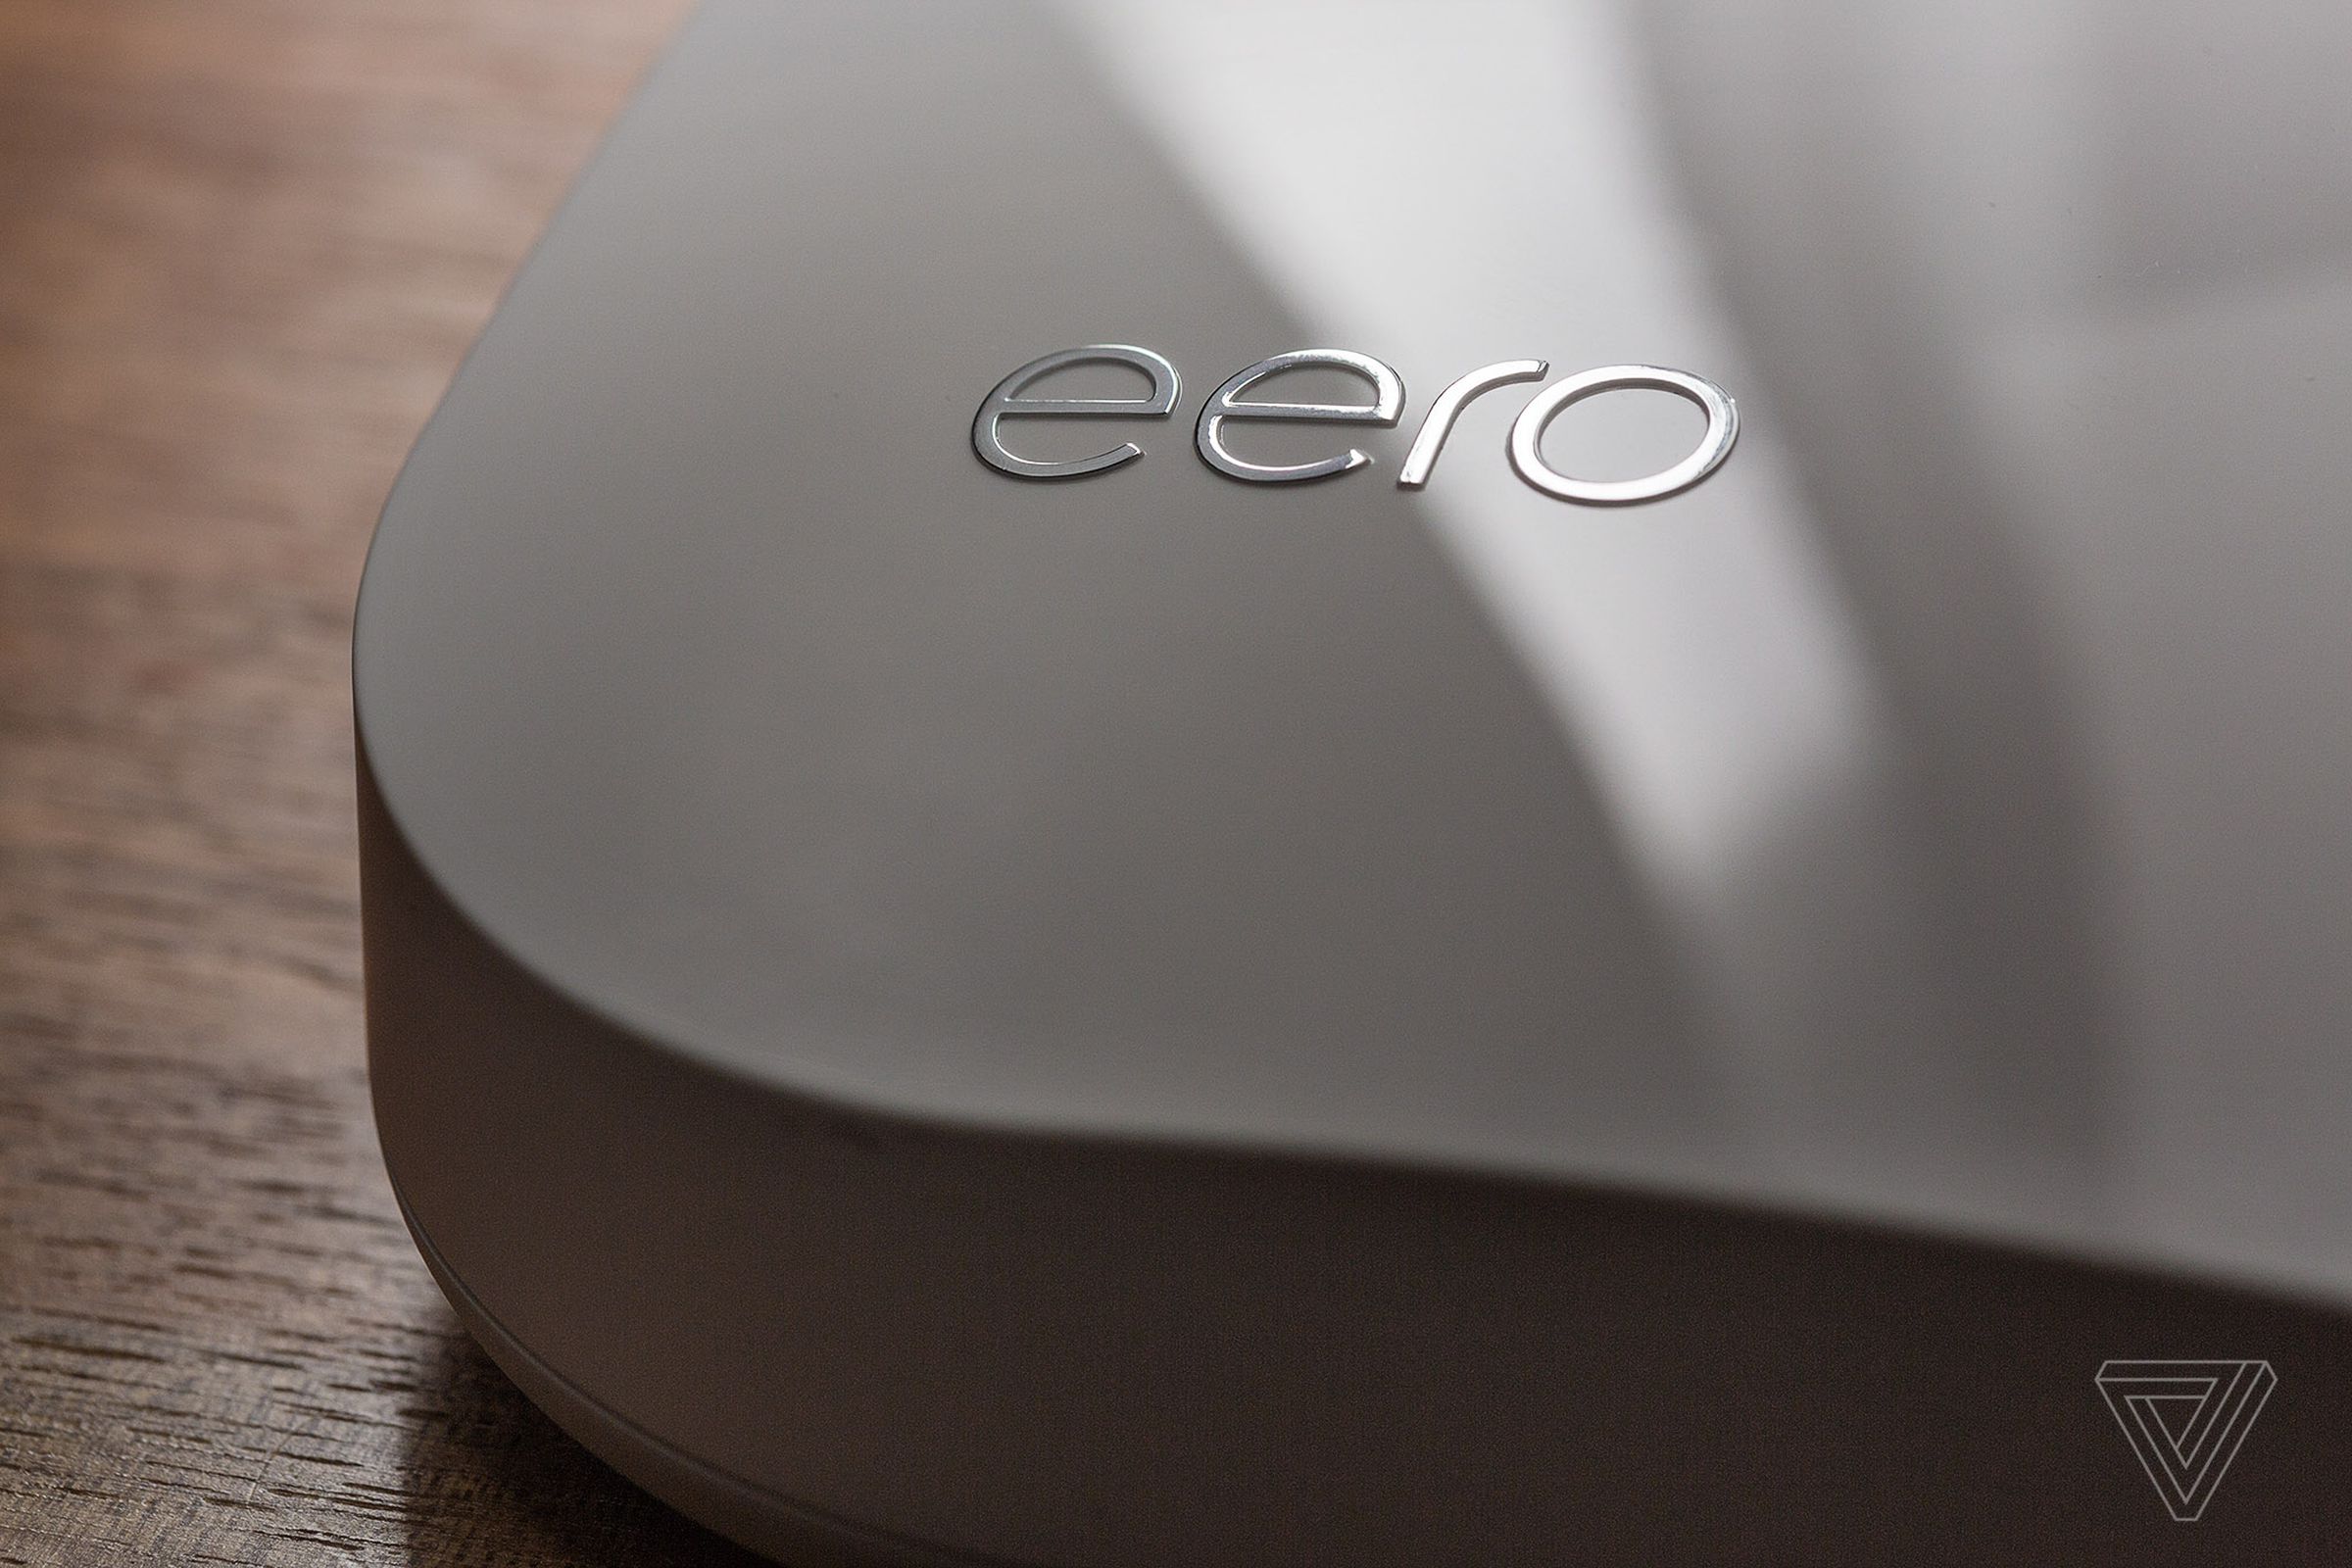 A close-up of an Eero Wi-Fi router.